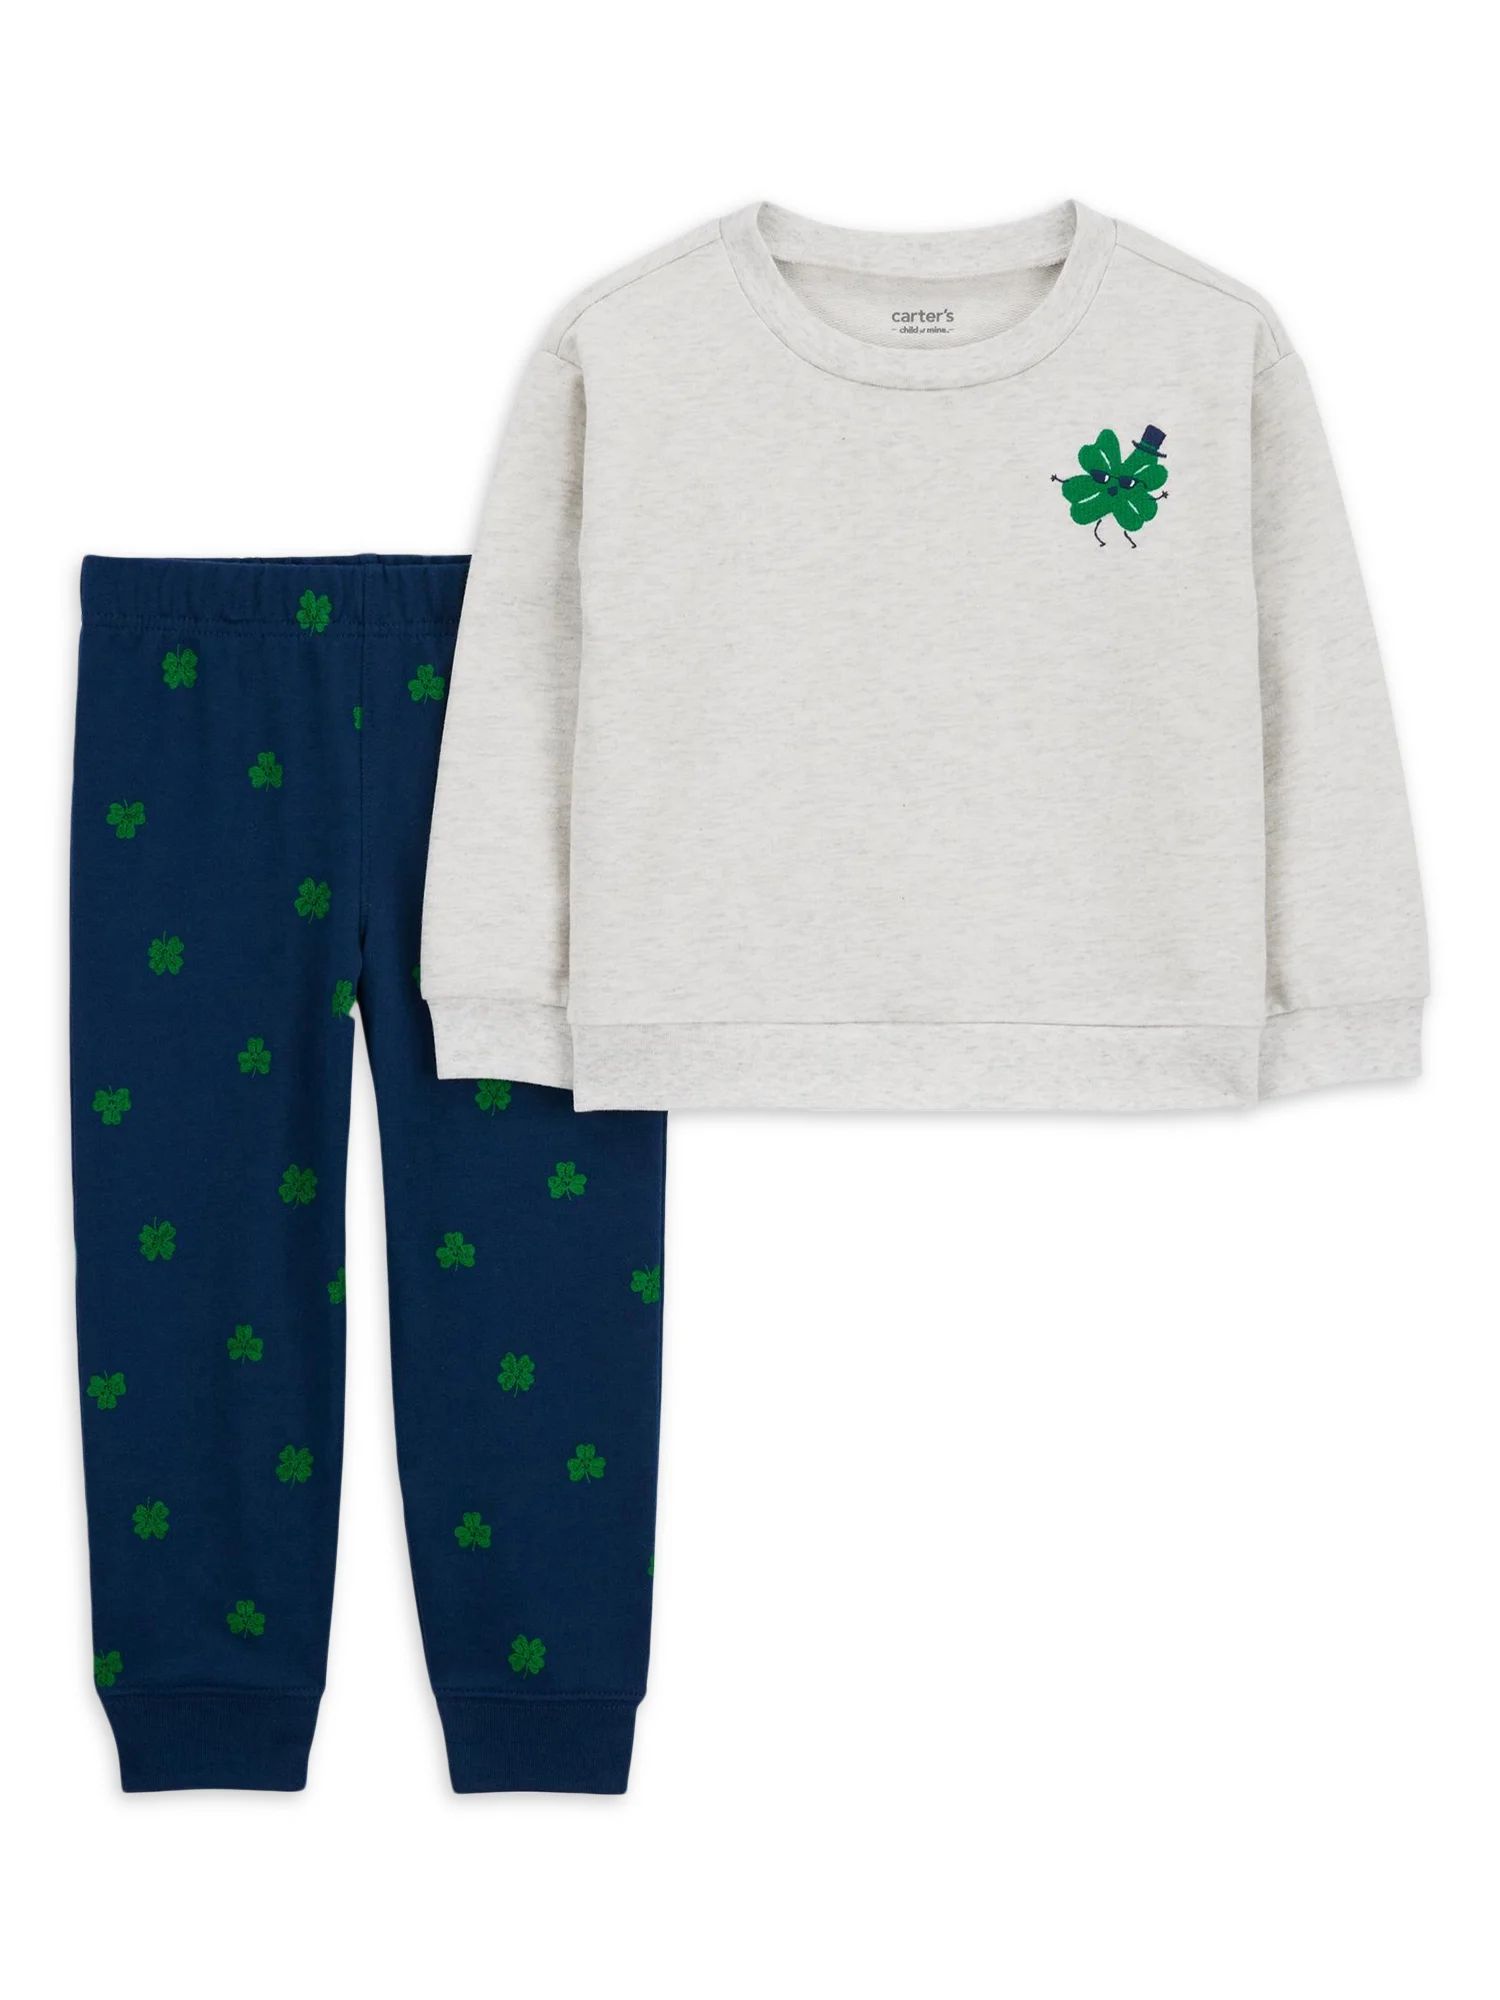 Carter's Child of Mine Toddler Boy St. Patrick's Day Outfit Set, Sizes 12M-5T | Walmart (US)